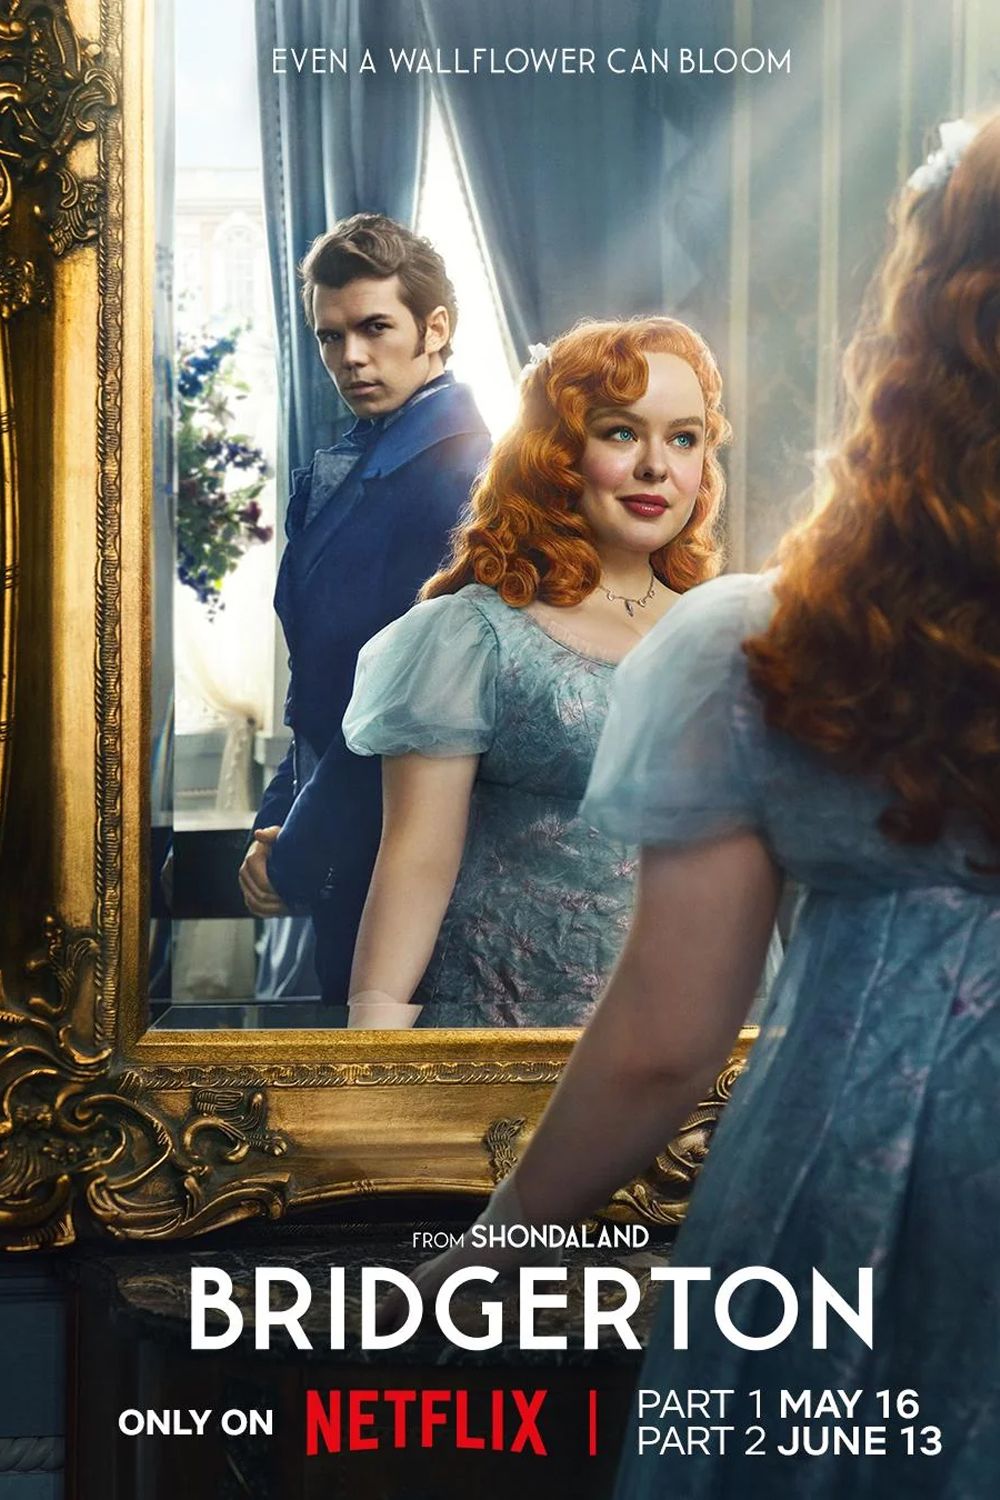 Poster for the third season of Bridgerton showing Penelope Featherington looking in a mirror